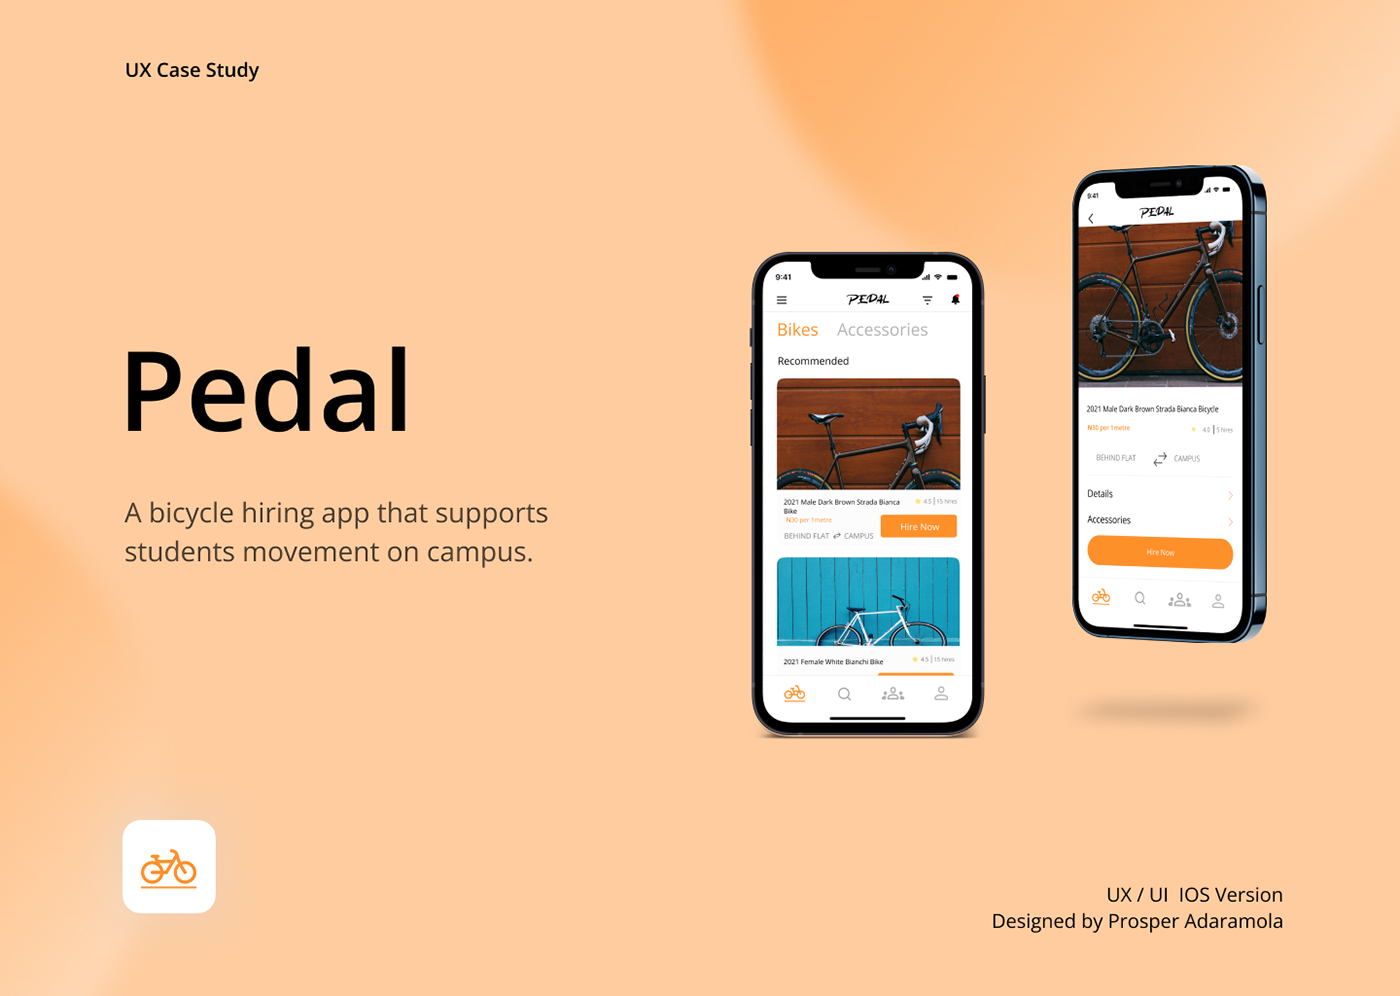 Bicycle Bicycle Design Case Study design Figma mobile Mobile app mobile app design ux UX design